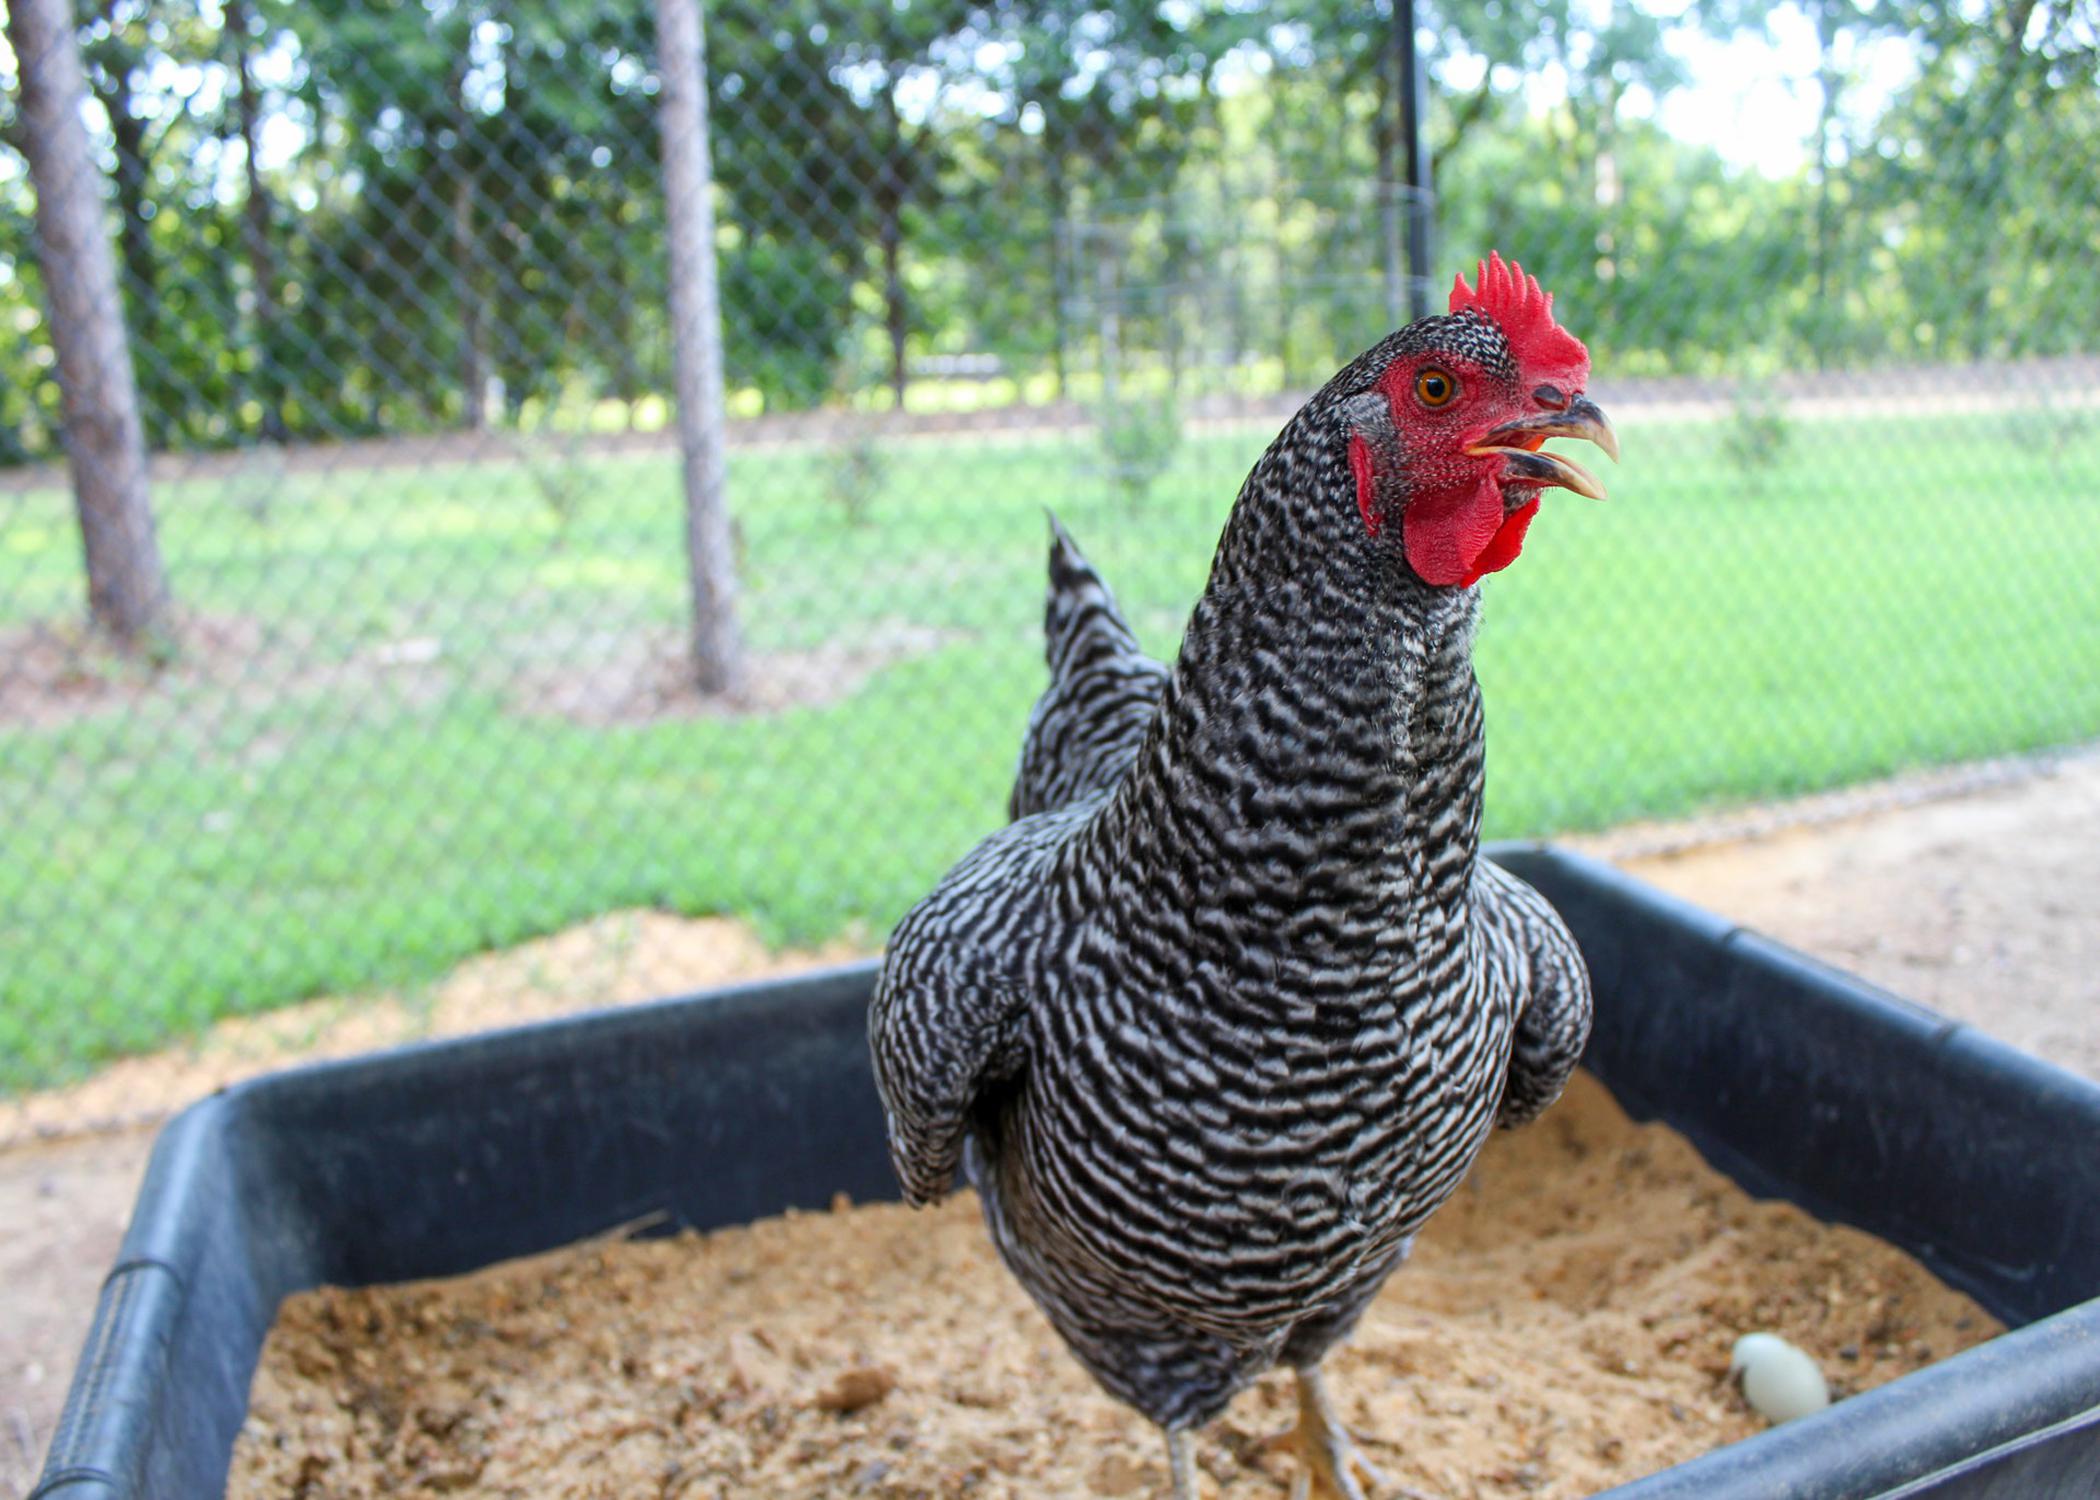 A black and white chicken stands in a black container inside an enclosure.